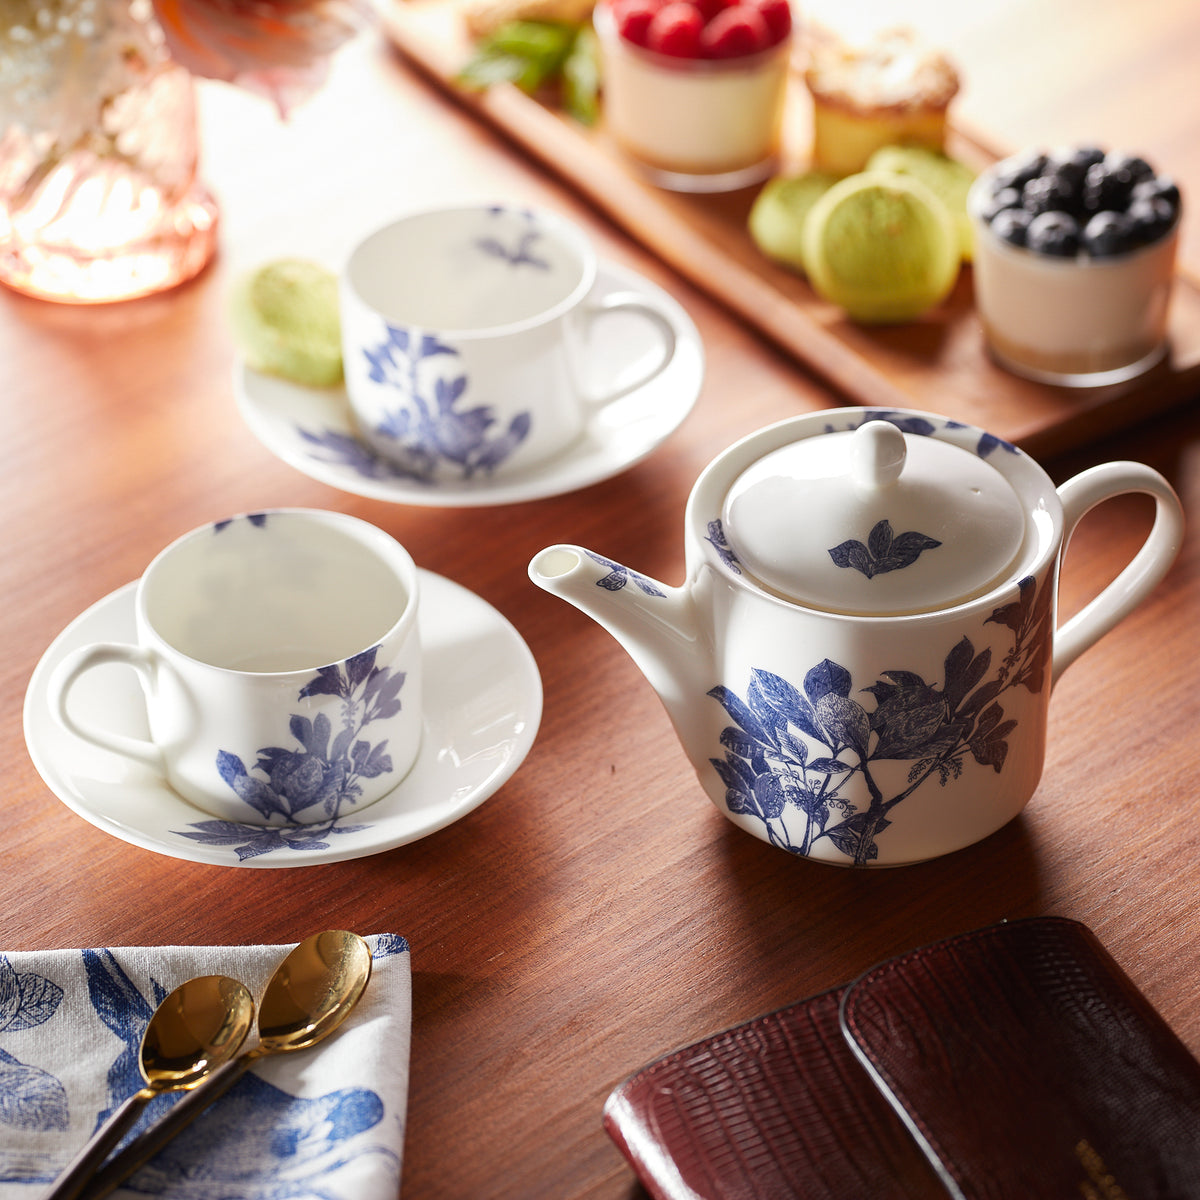 A wooden table with a tea set featuring a teapot and Caskata Artisanal Home Arbor Cups &amp; Saucers, Set of 2 with blue and white floral patterns, a napkin, two spoons, and a variety of desserts and fruits in the background. The elegant blue and white dinnerware complements the scene perfectly.